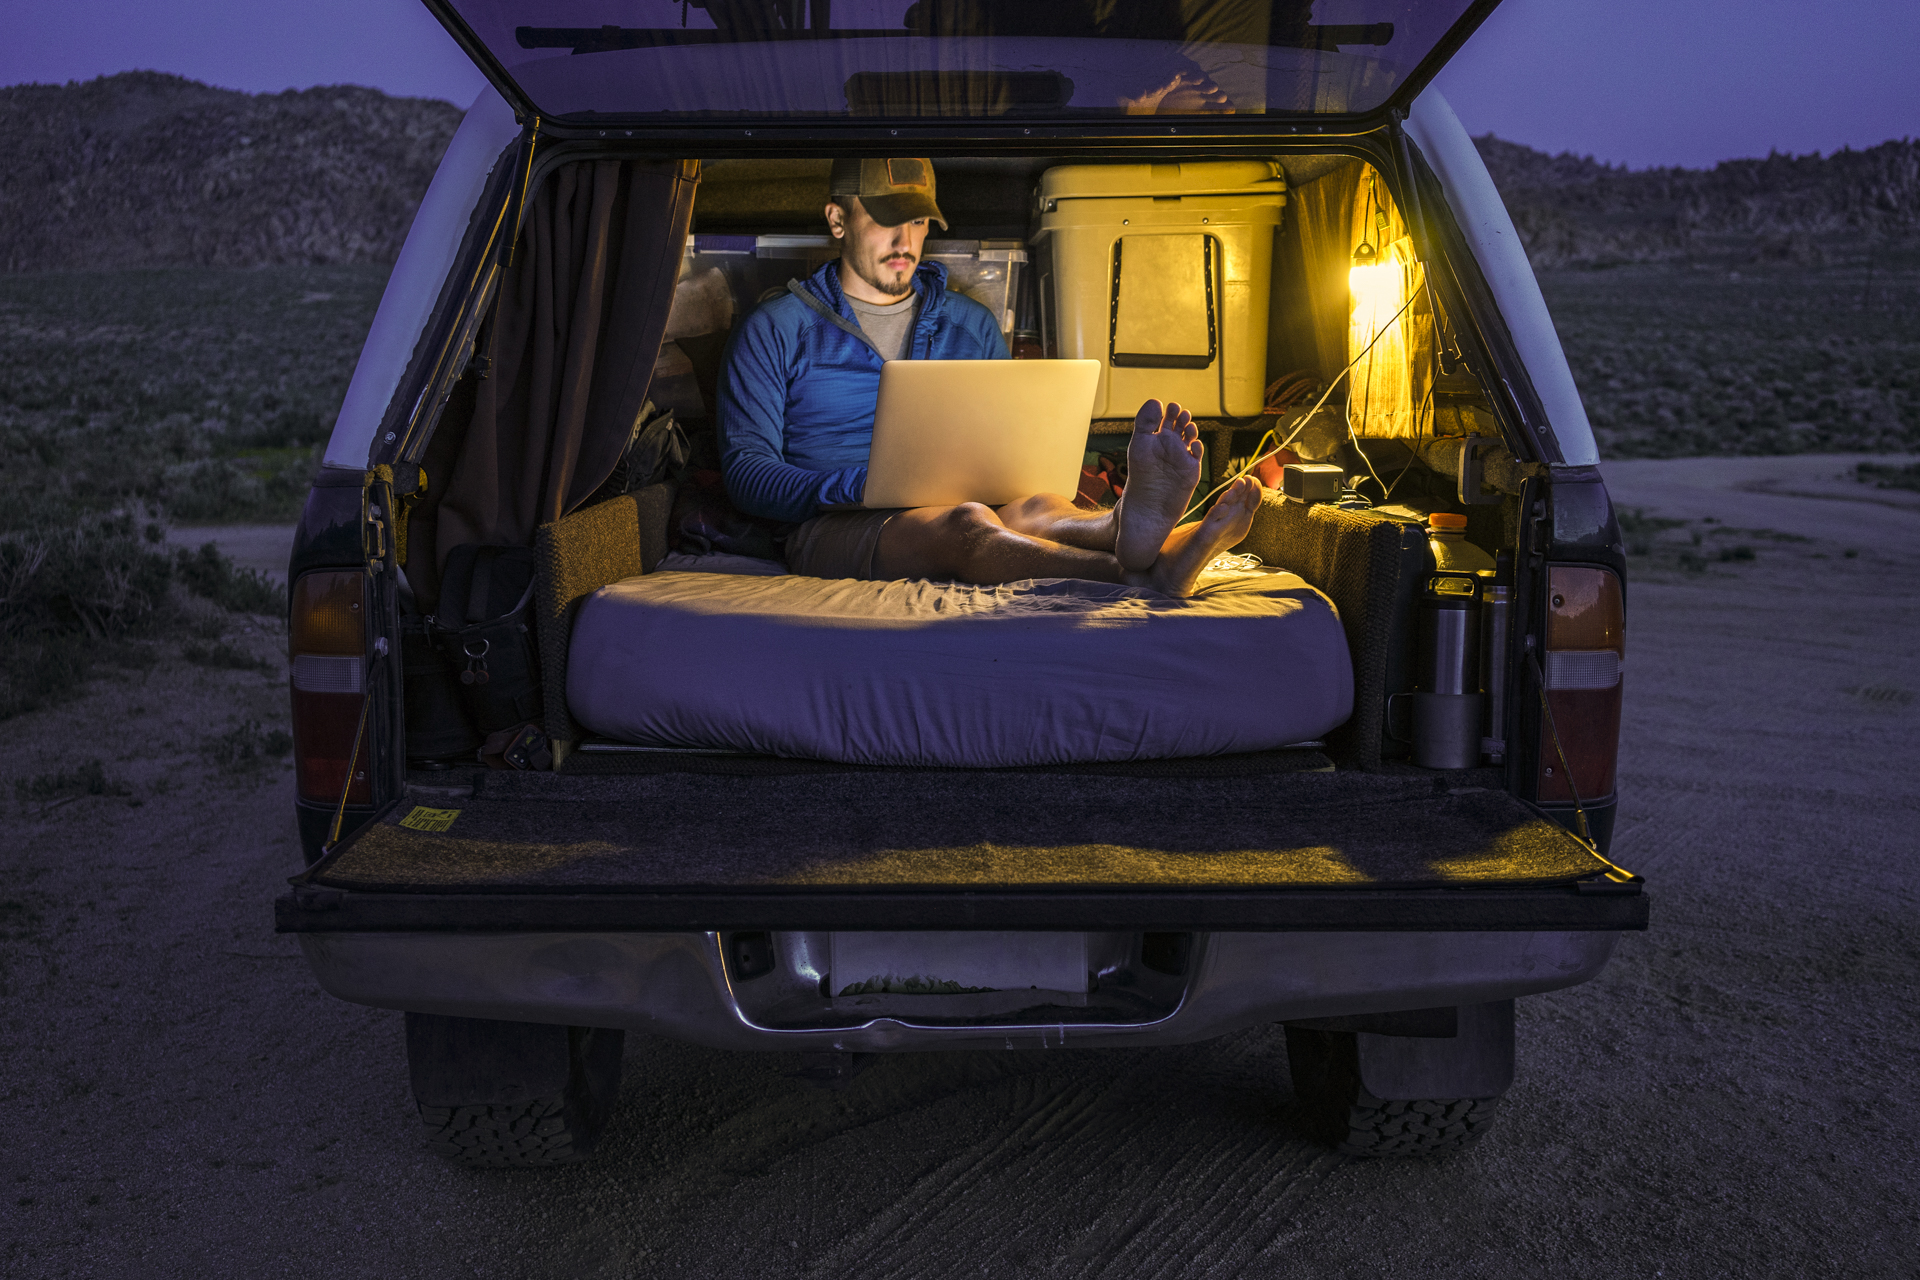 Here's how to live in your car comfortably for a few weeks (or